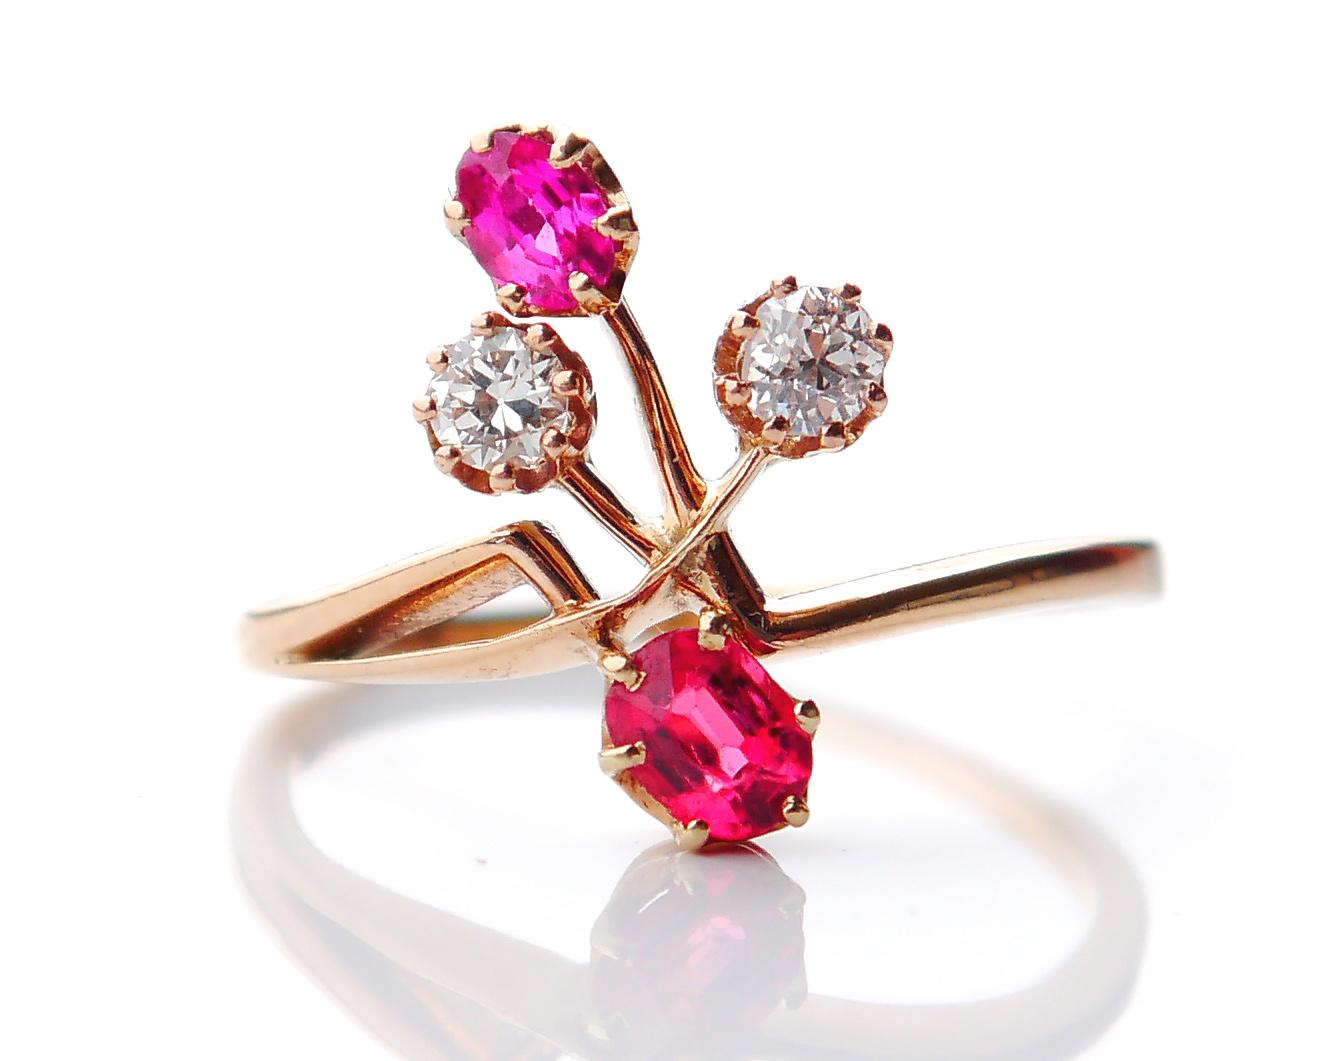 Art Nouveau period Ring in solid 18K (tested) Gold with a mix of two natural Diamonds , natural Ruby and natural Spinel stones made Europe in ca. early XX century.

Two old diamond cut Diamonds Ø 3.5 mm / 0.17 ct each .Color ca. H,G / VVS .

Minor